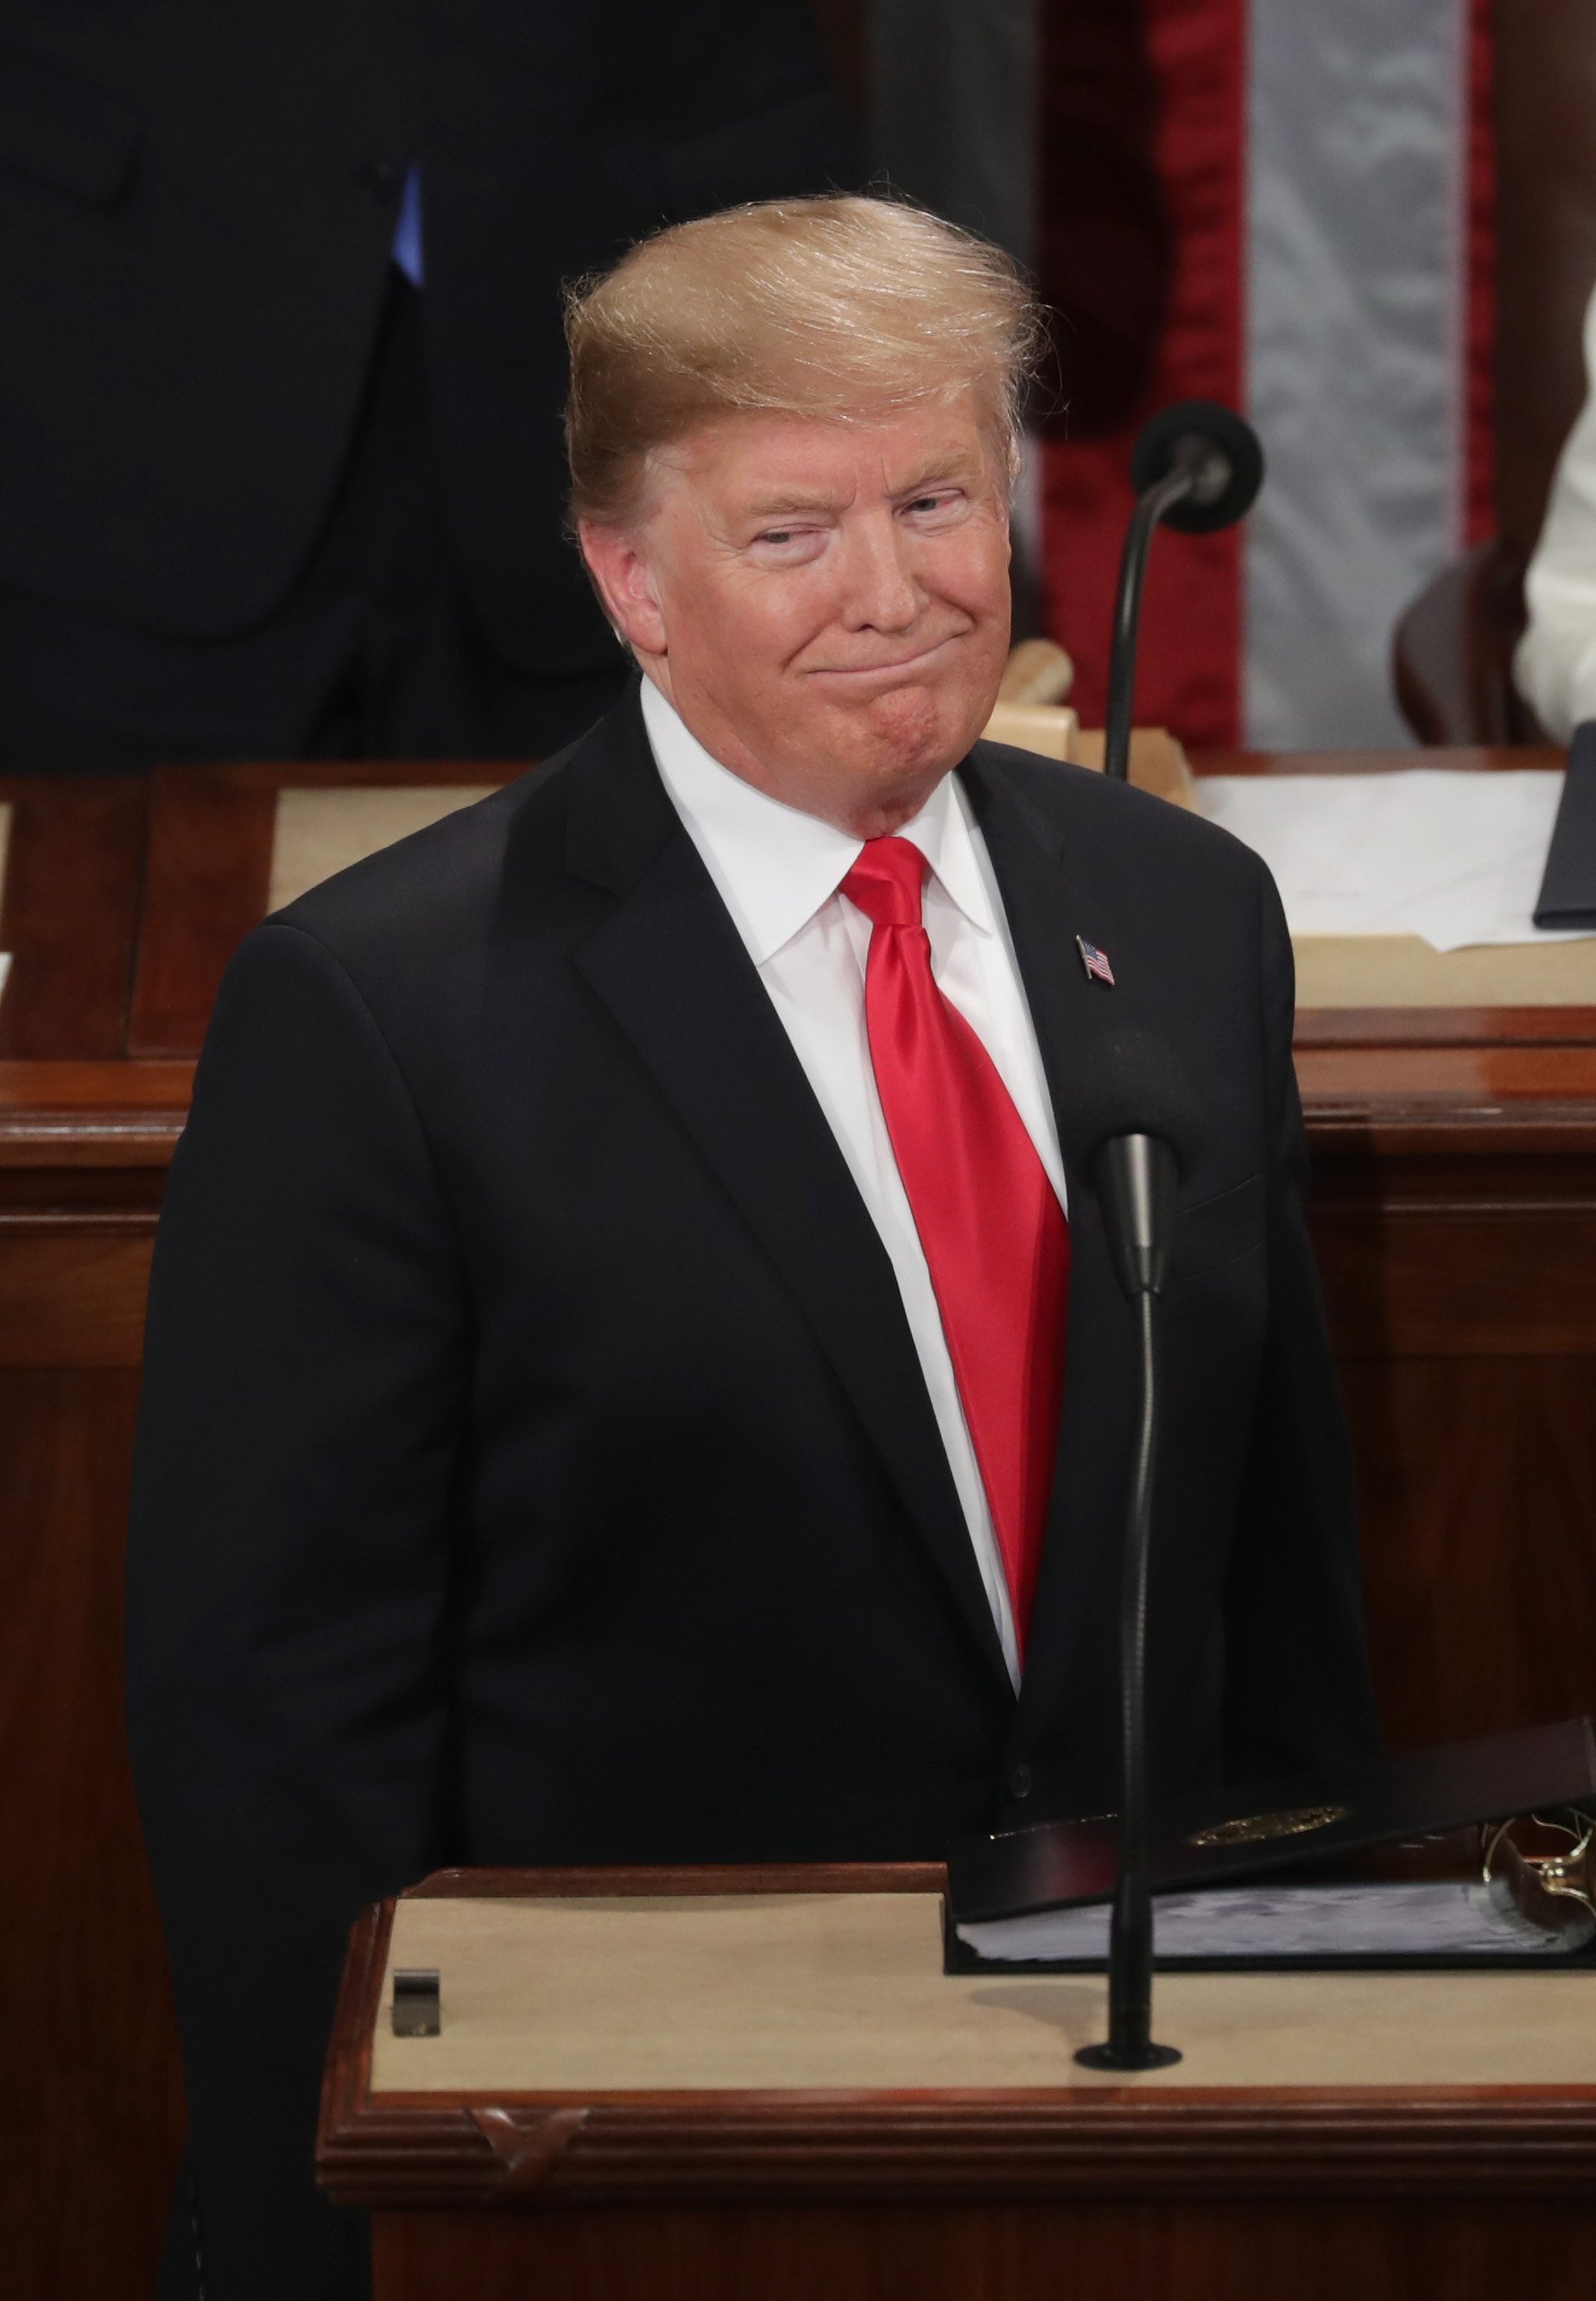 President Donald Trump at the State of the Union adress | Photo: Getty Images